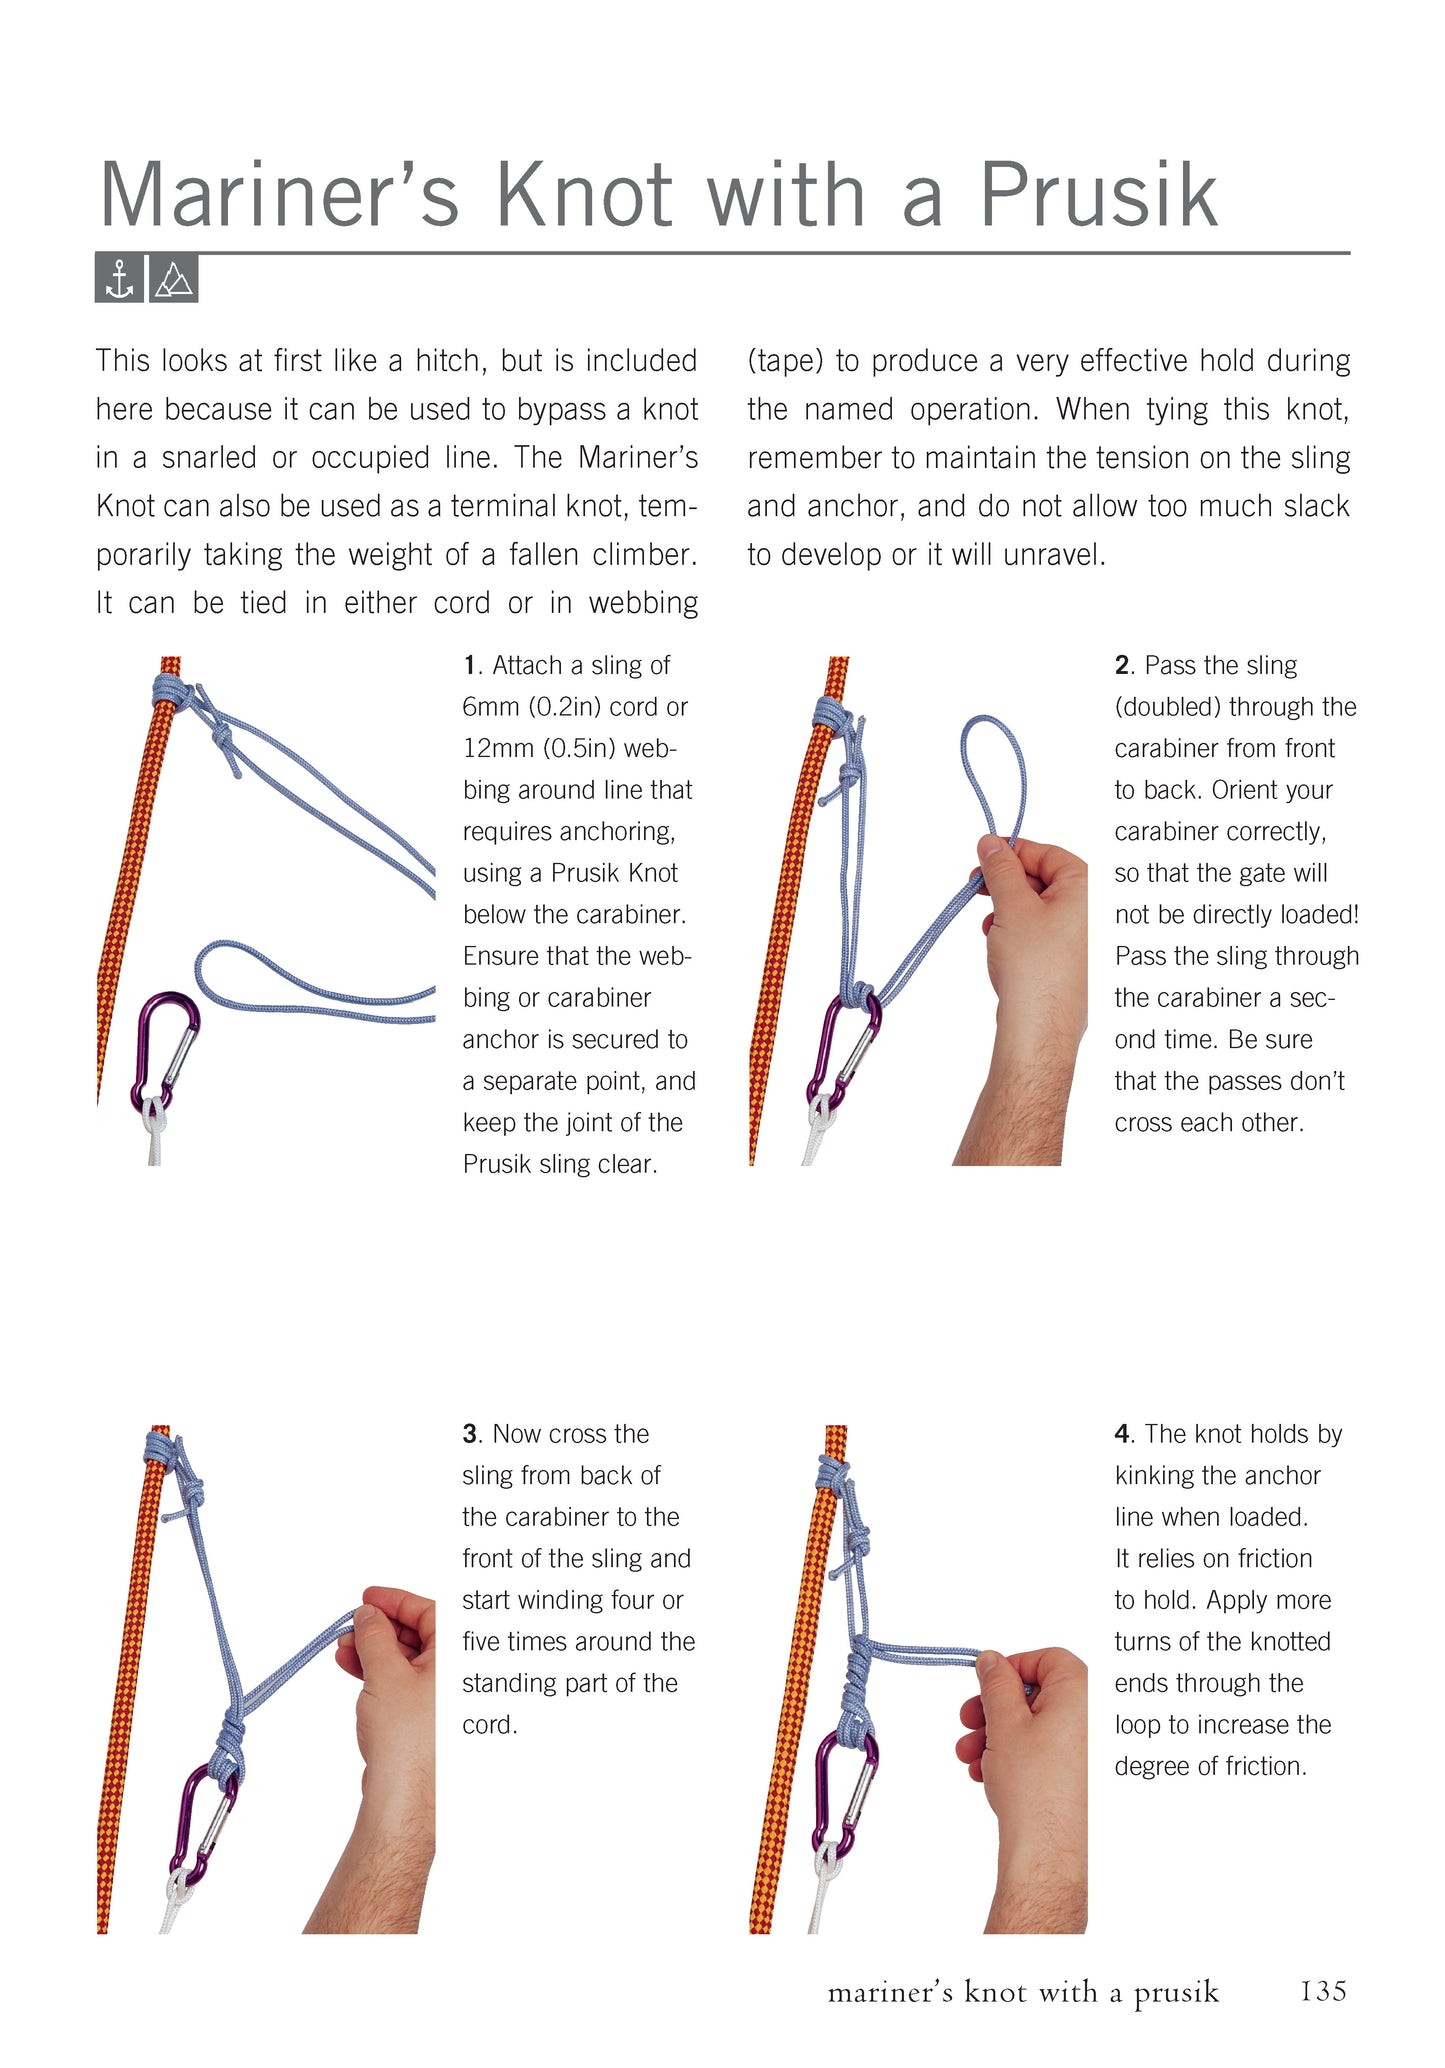 Pocket Guide to Knots